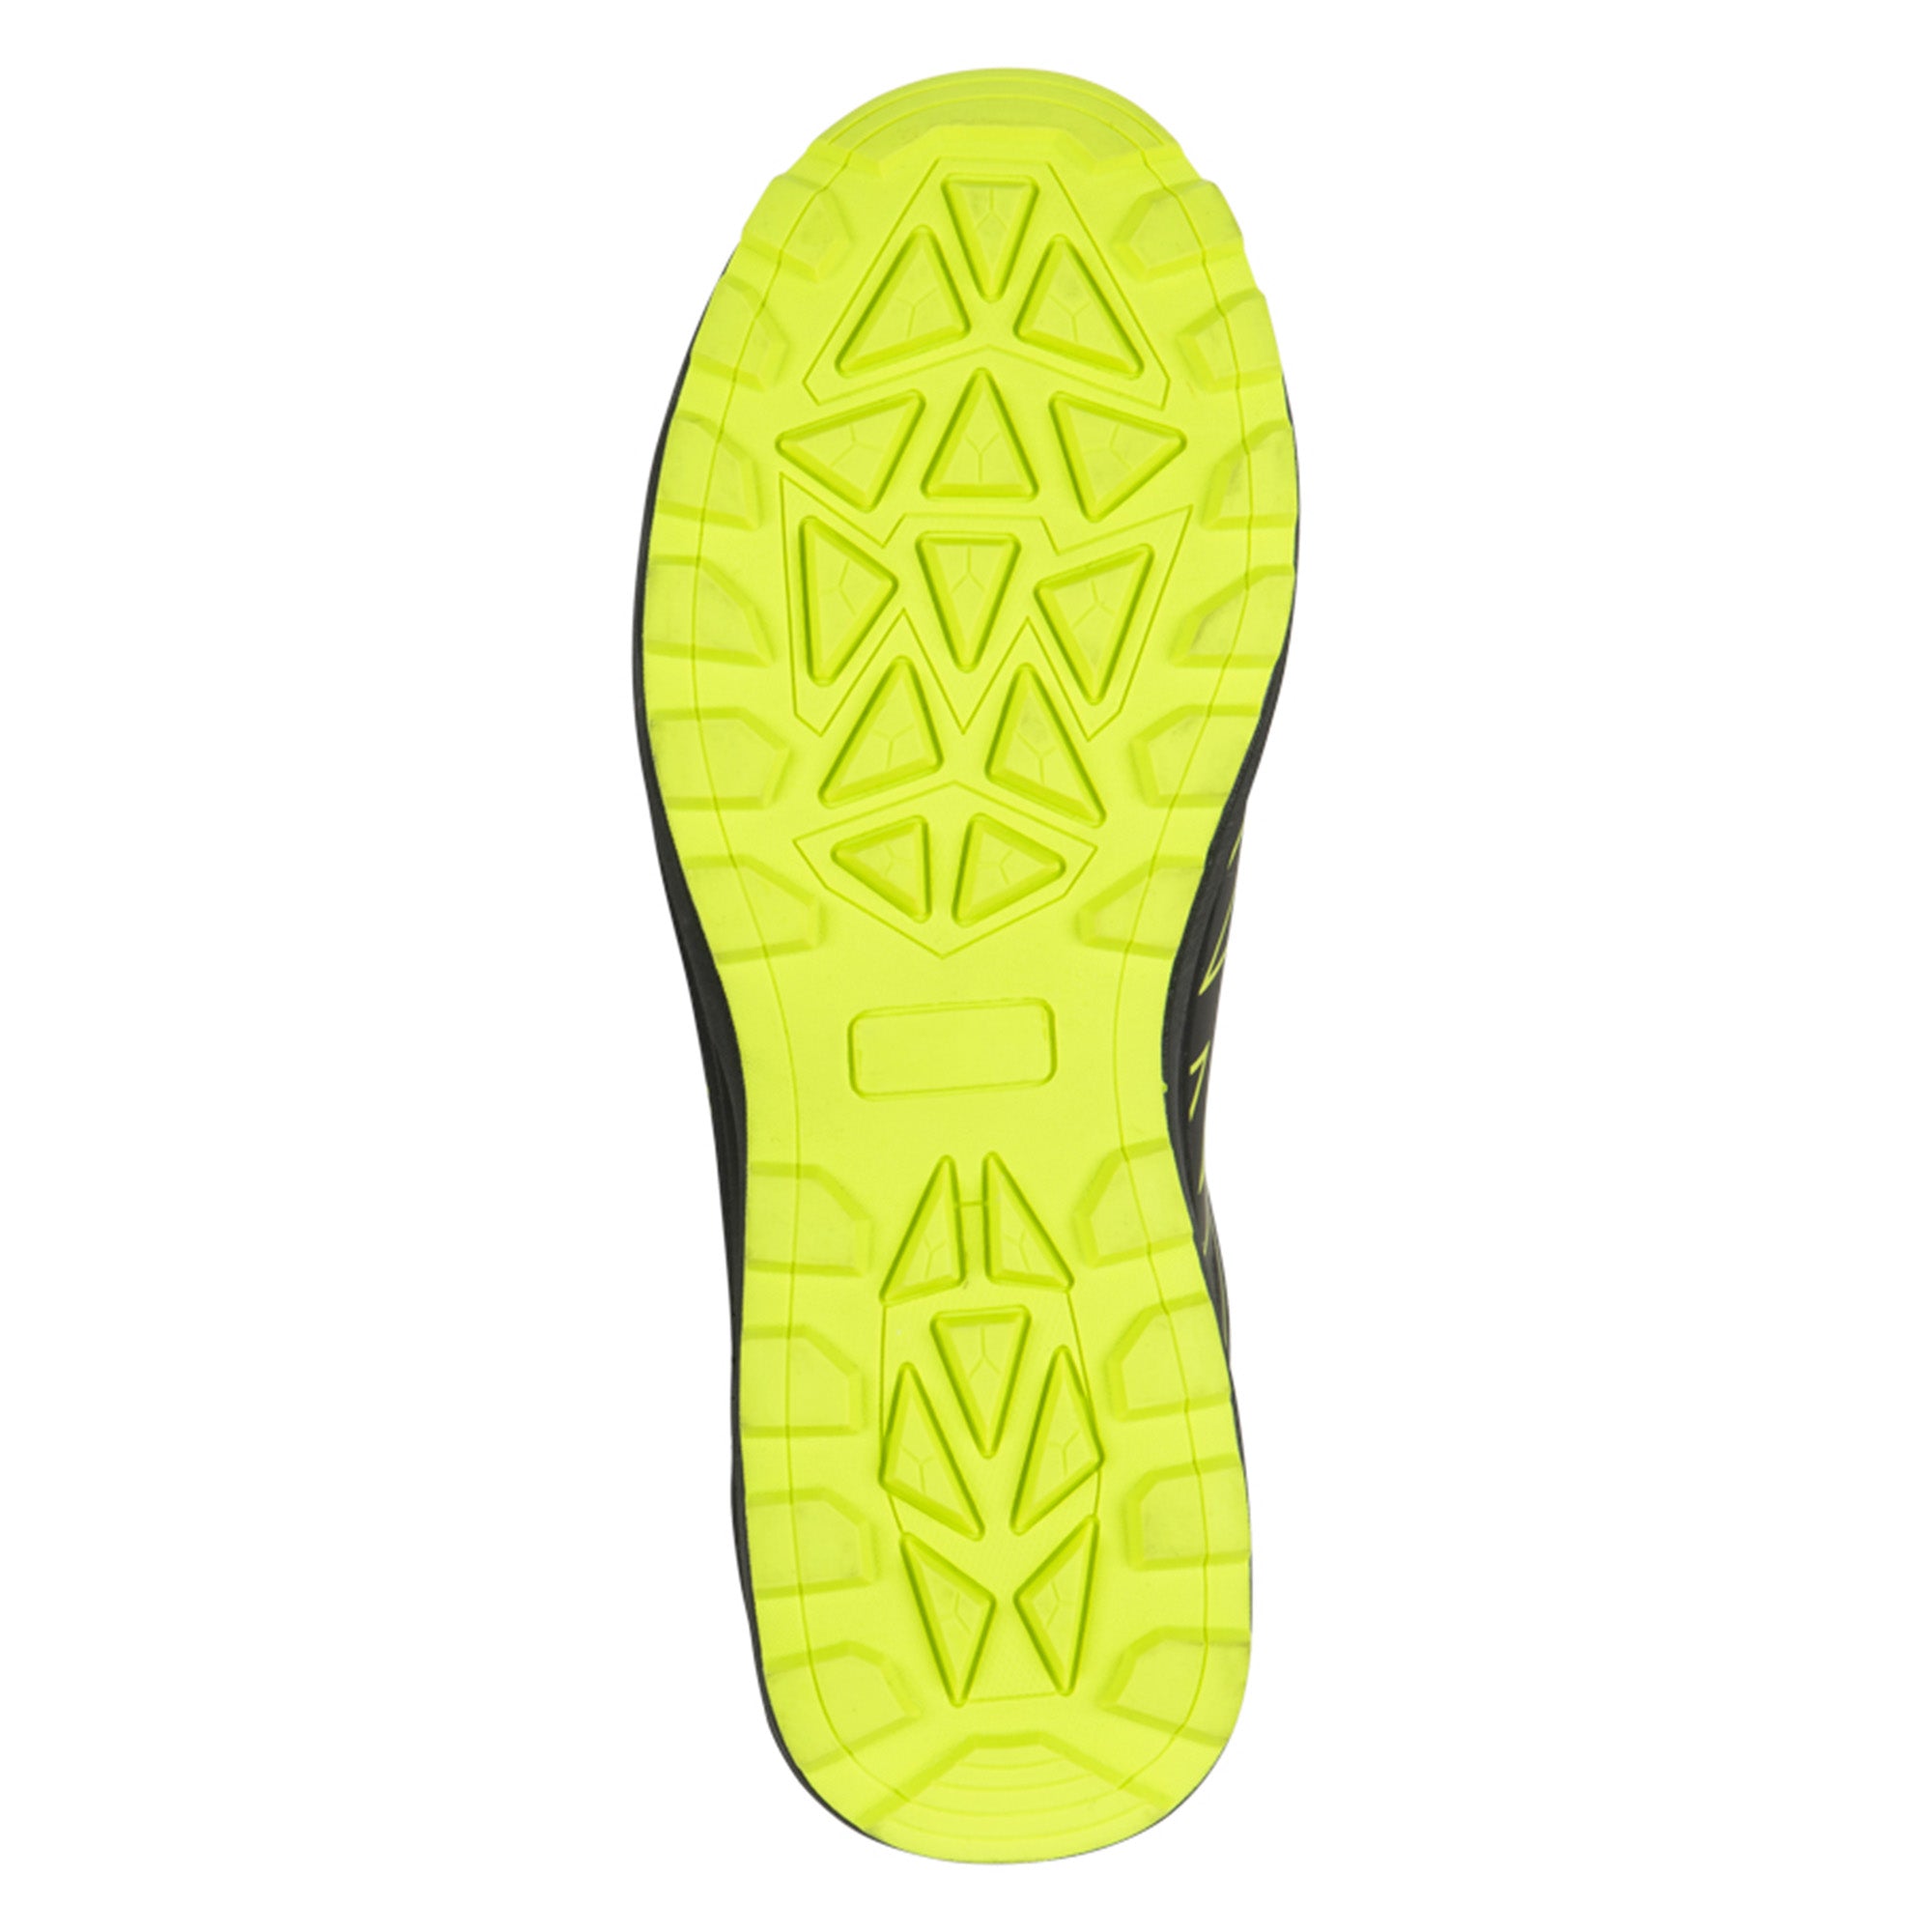 SPILL - LOW SAFETY SHOES - 7045 | Black / Fluorescent yellow